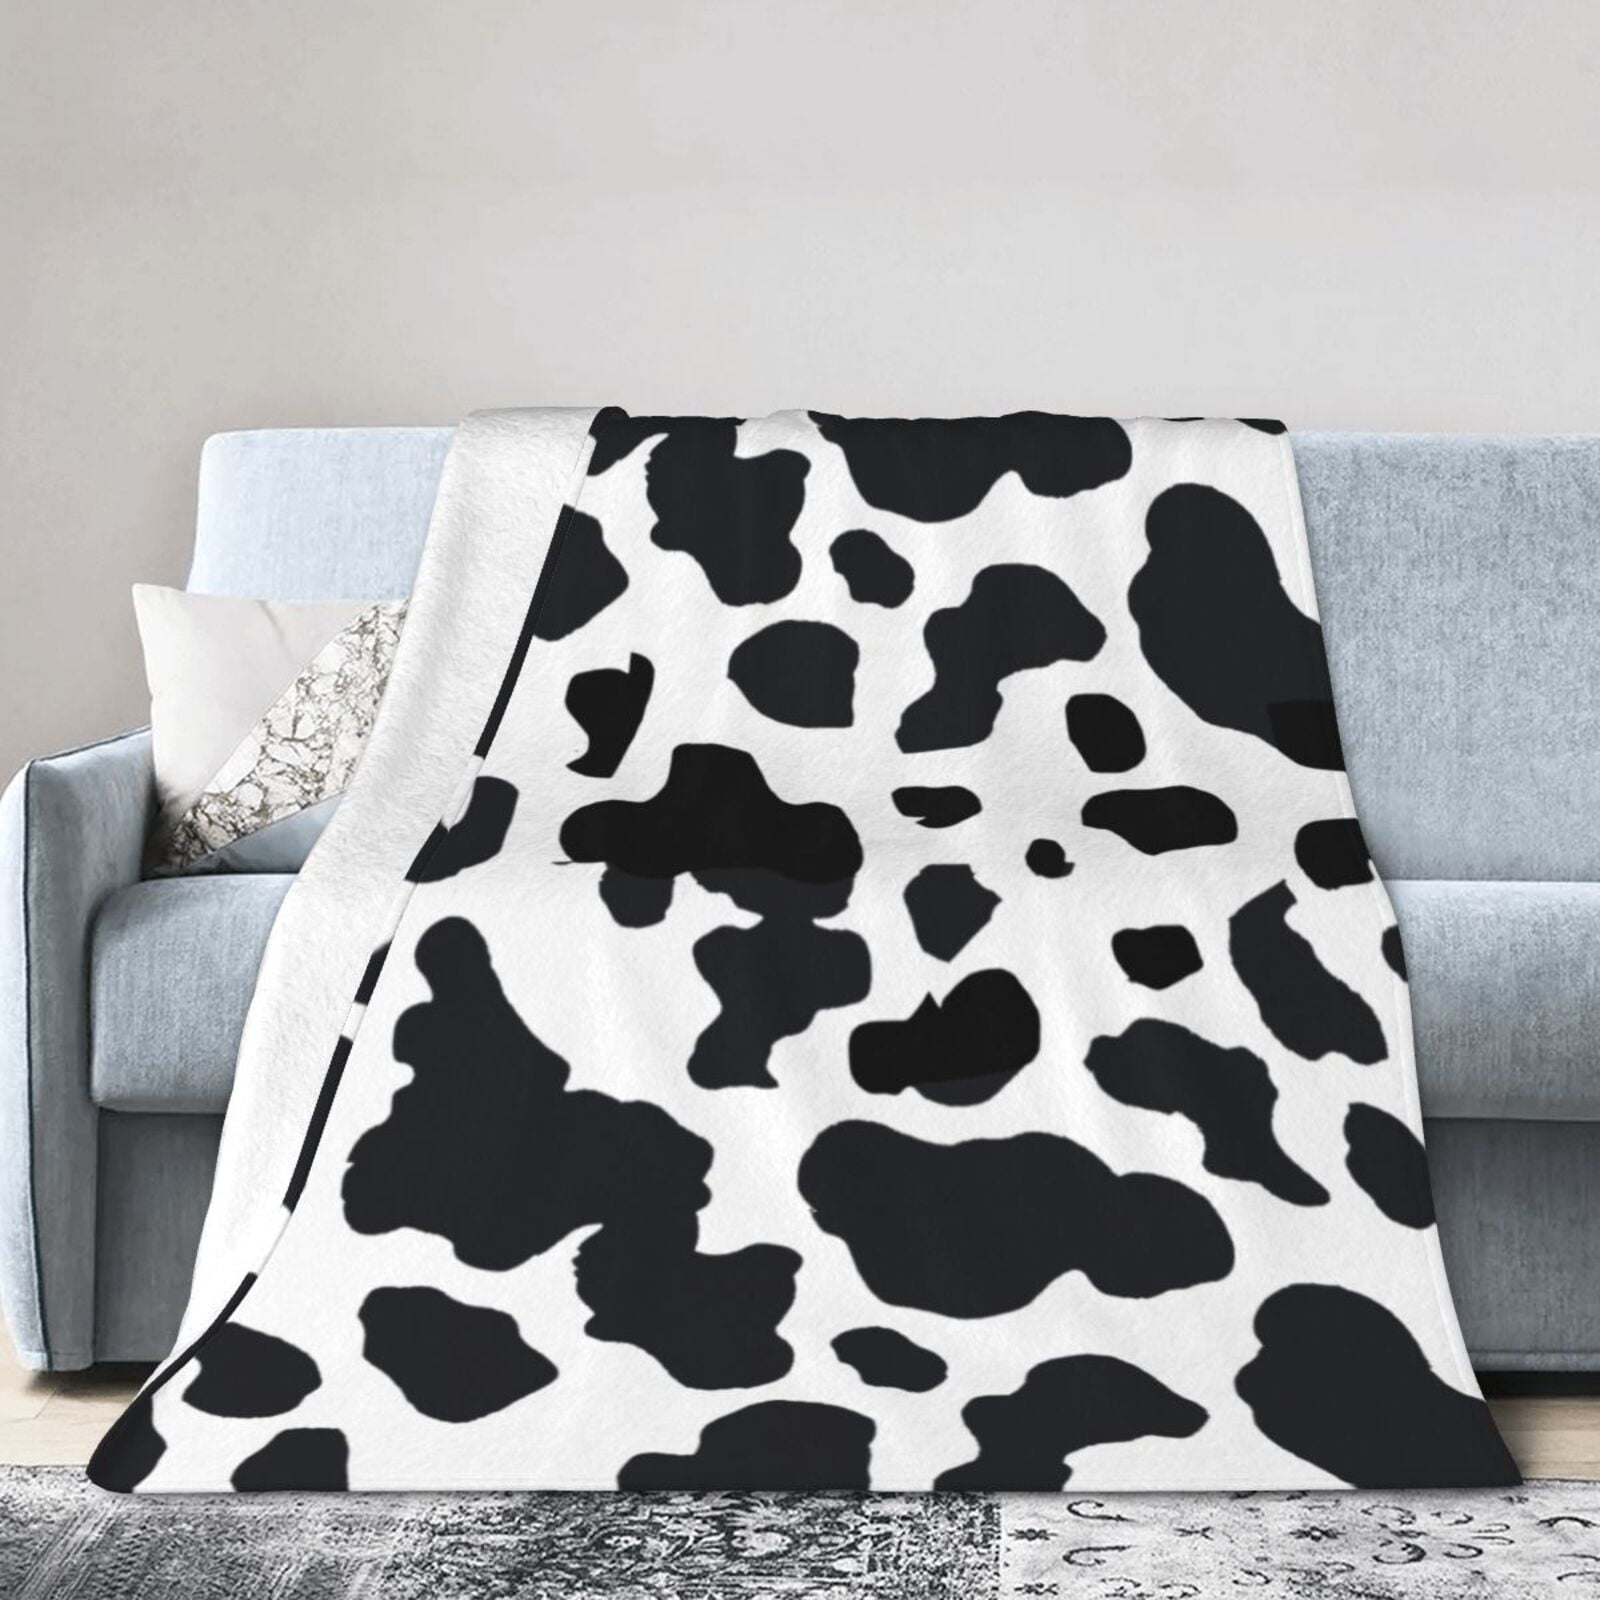 50 x 60 Sublimation 20 Panel Patterned Blanket - Cow Print